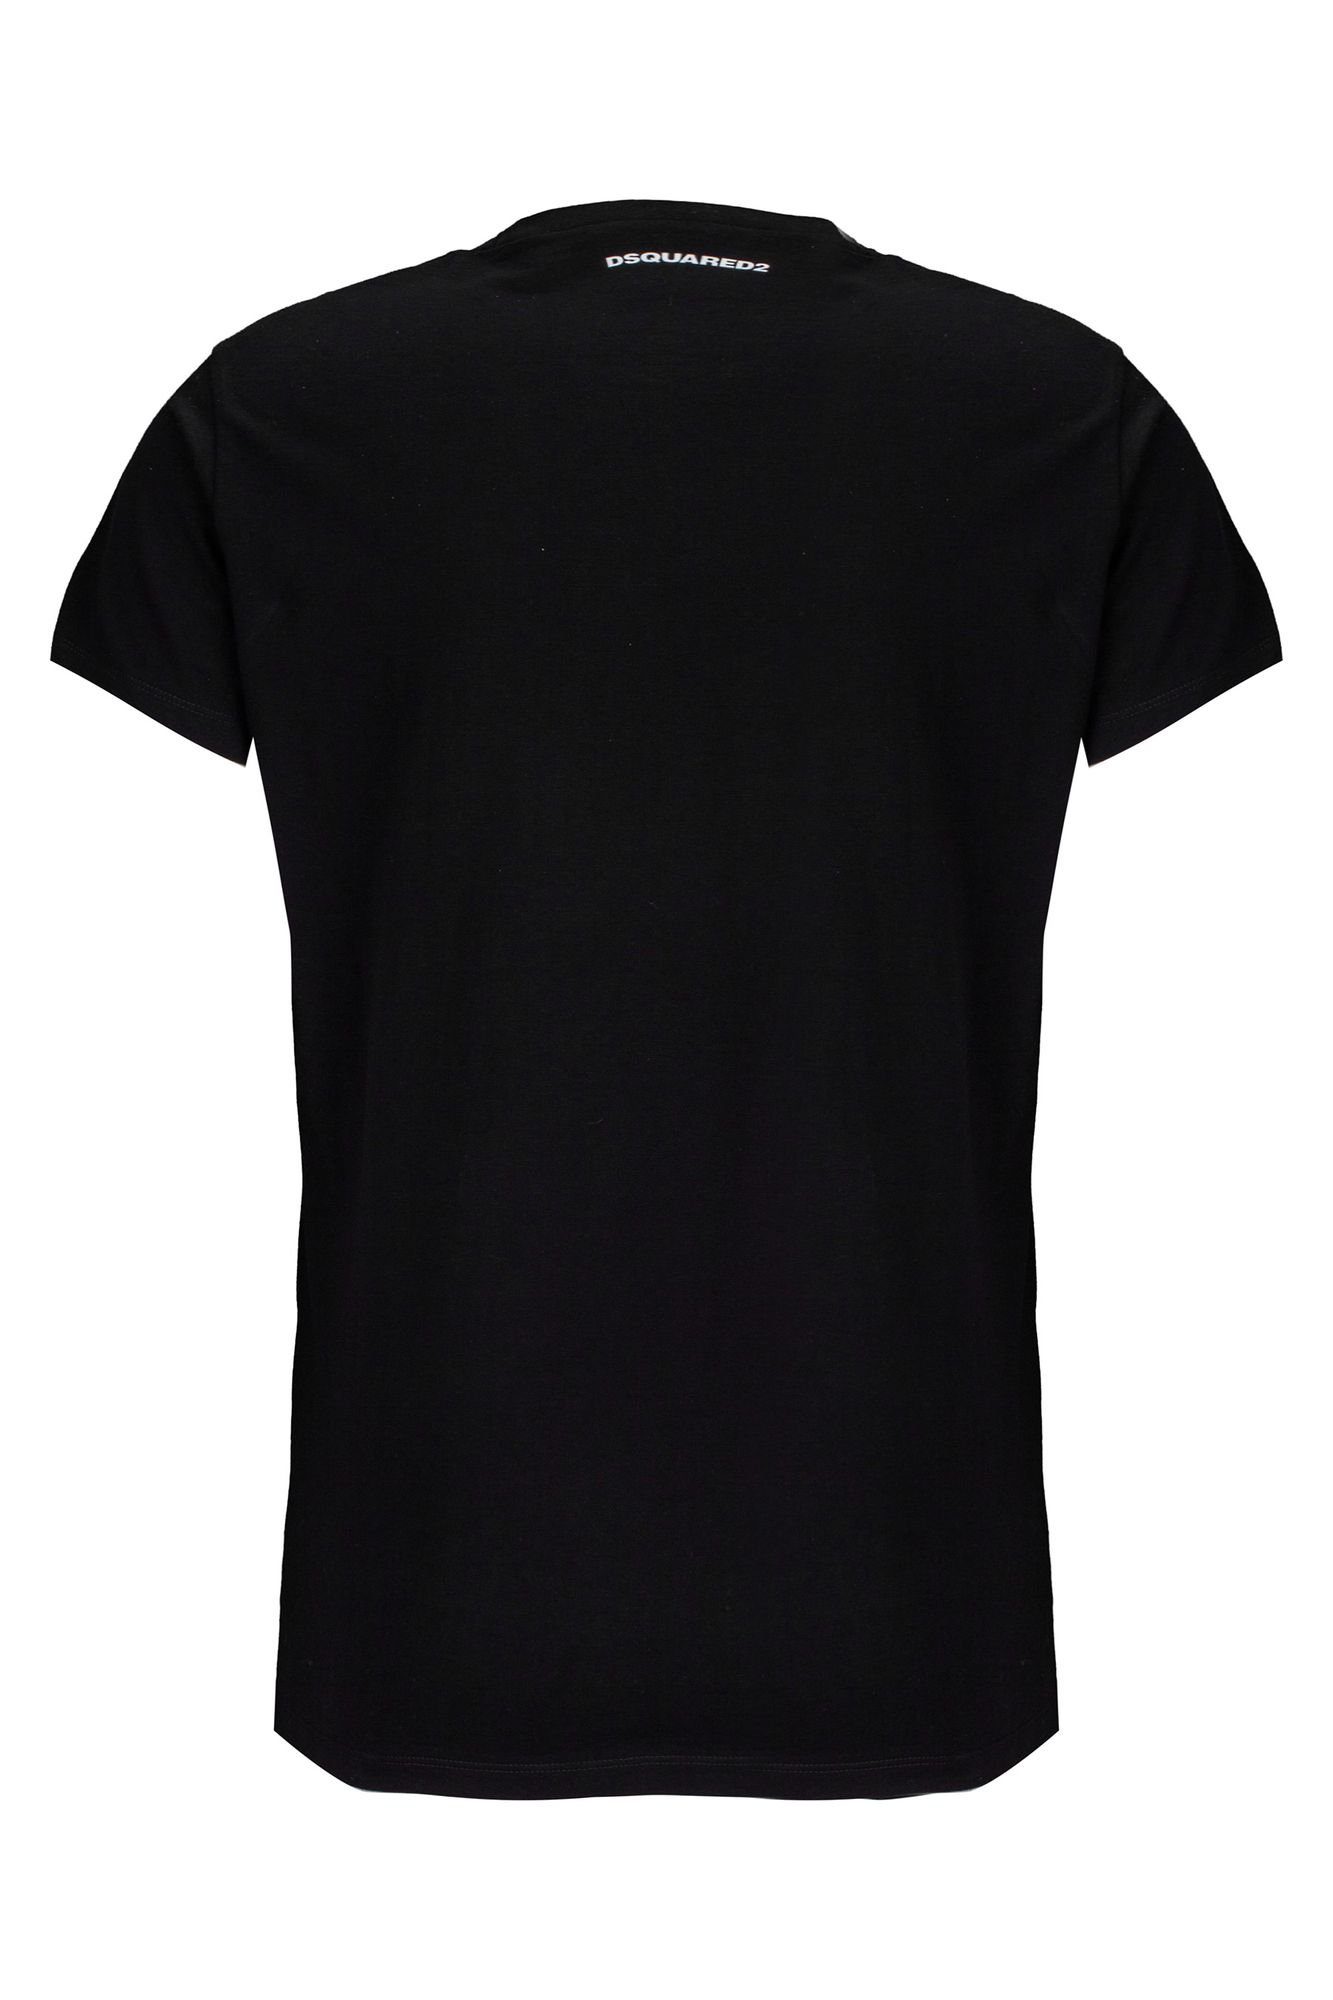 Dsquared2 T-Shirt Icon